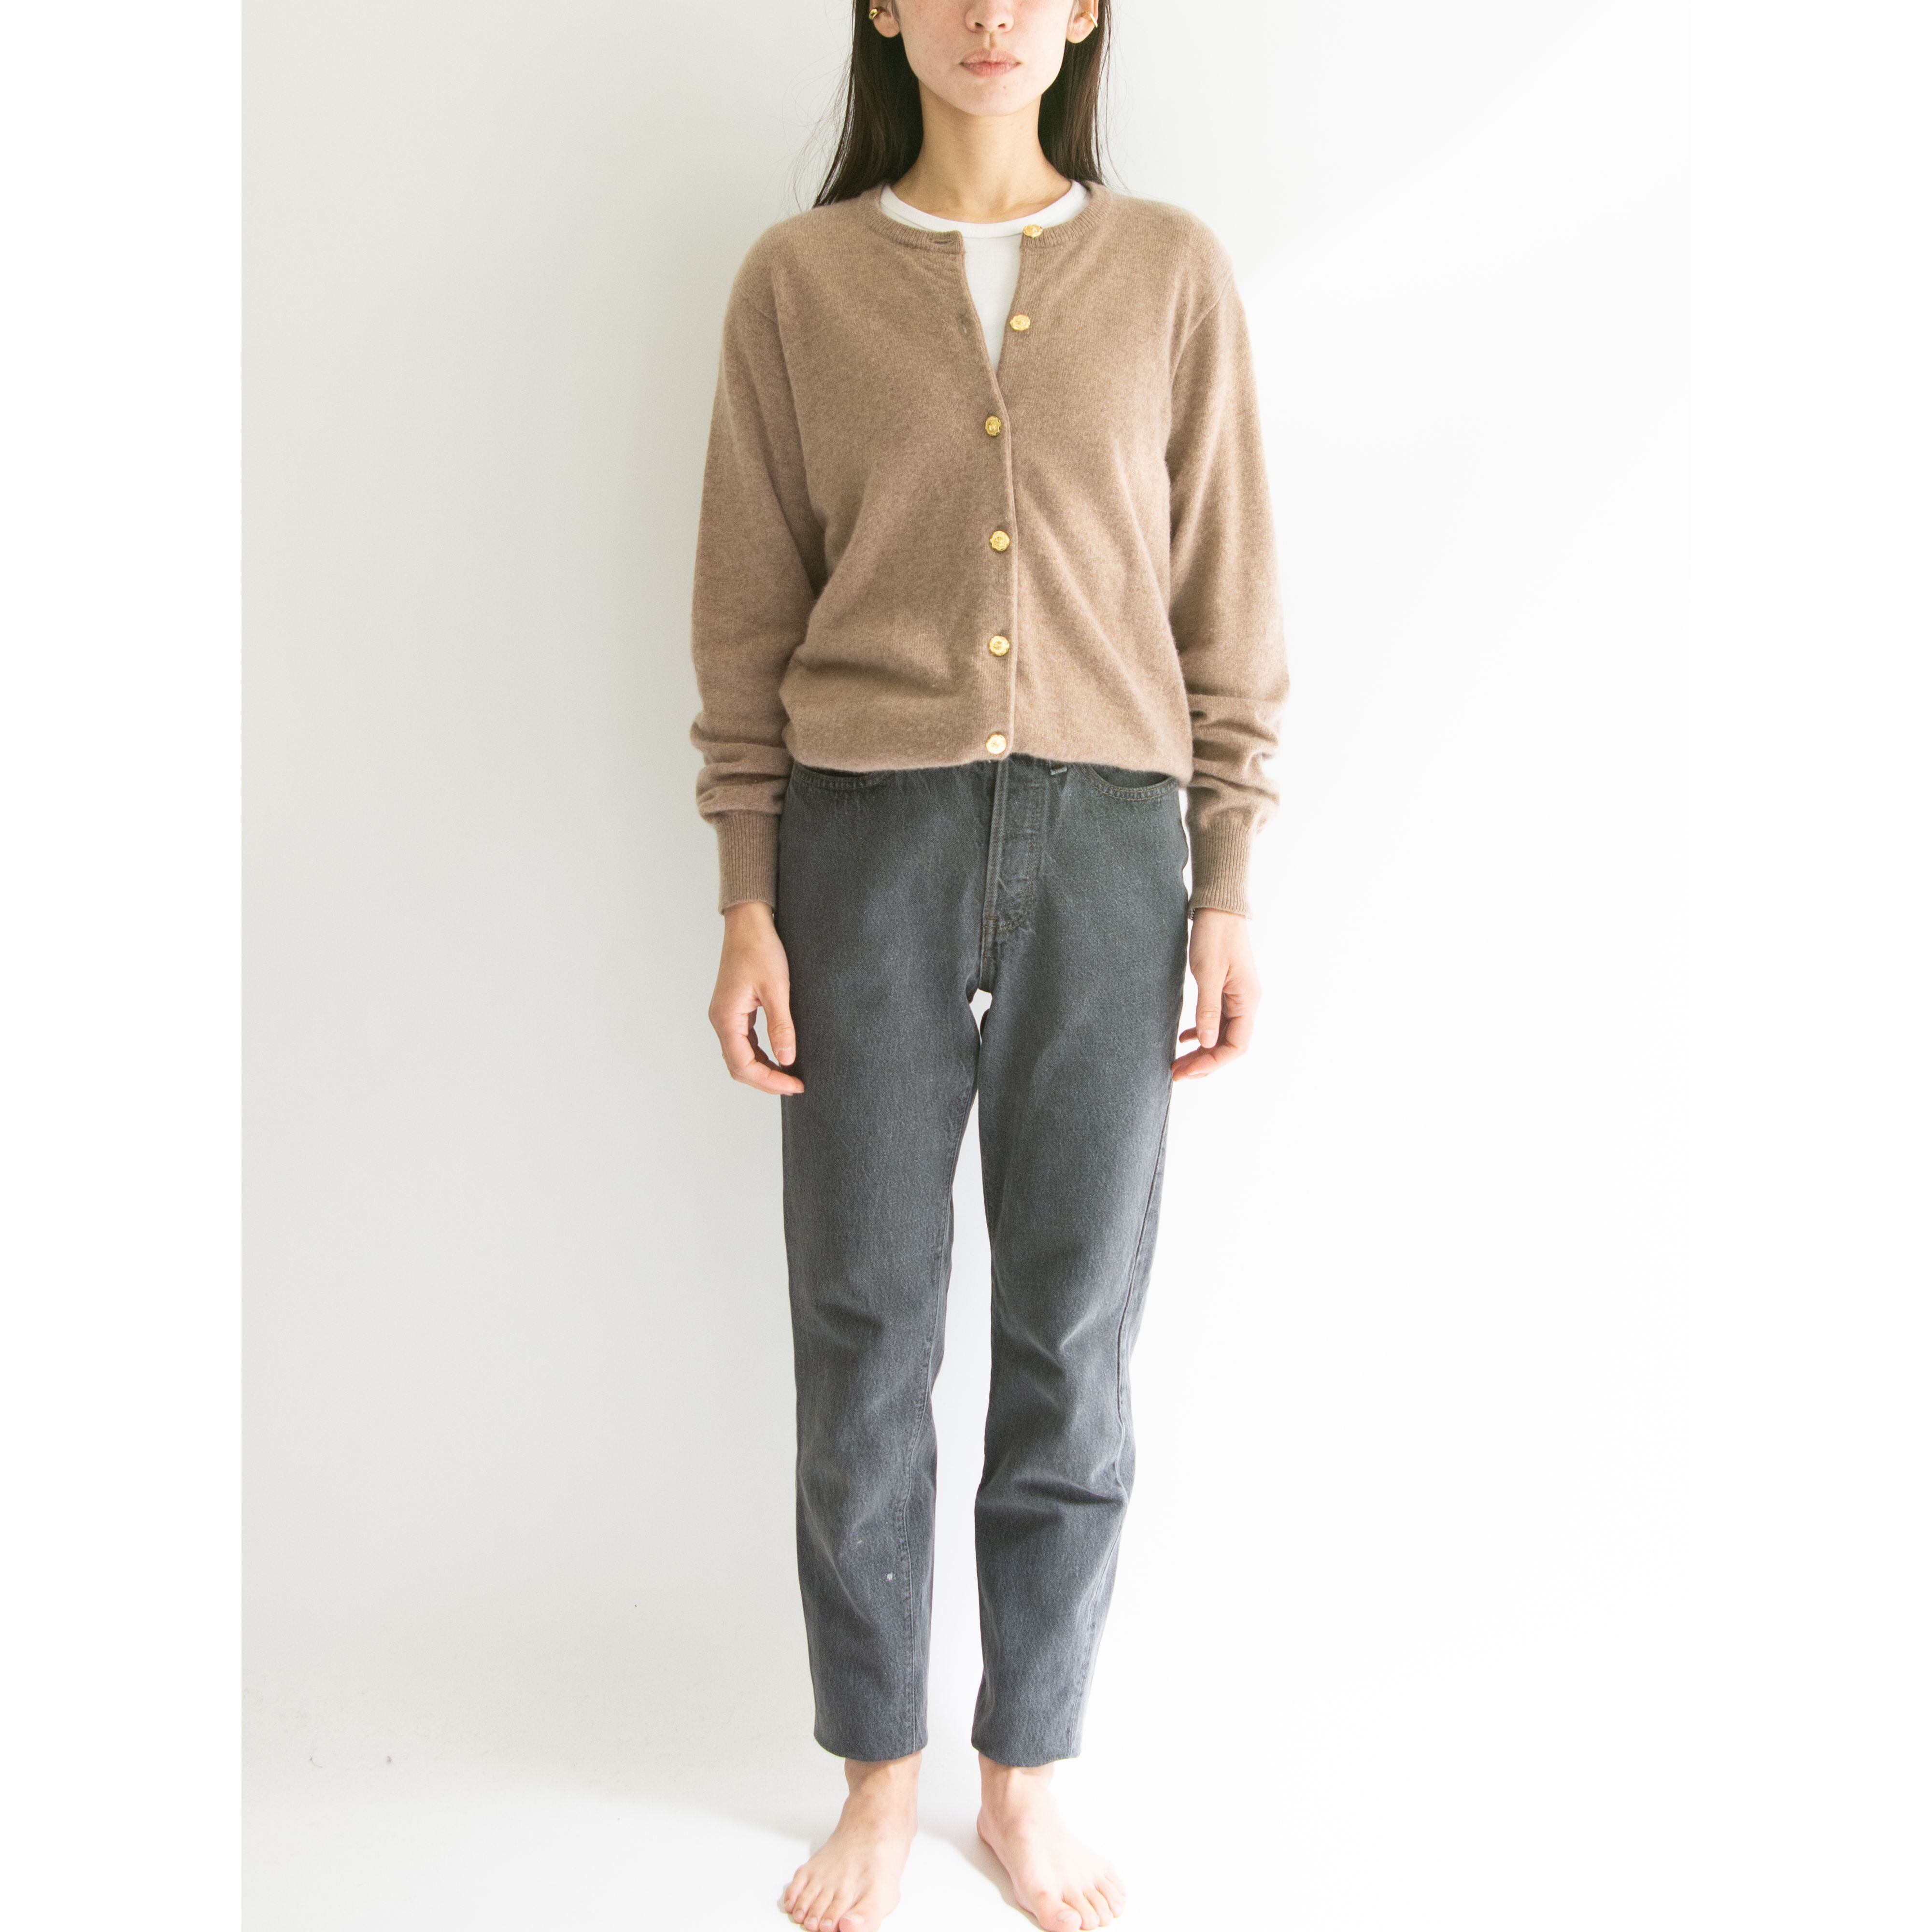 Unknown Brand】Made in China 100% Cashmere Knit Cardigan（カシミヤ